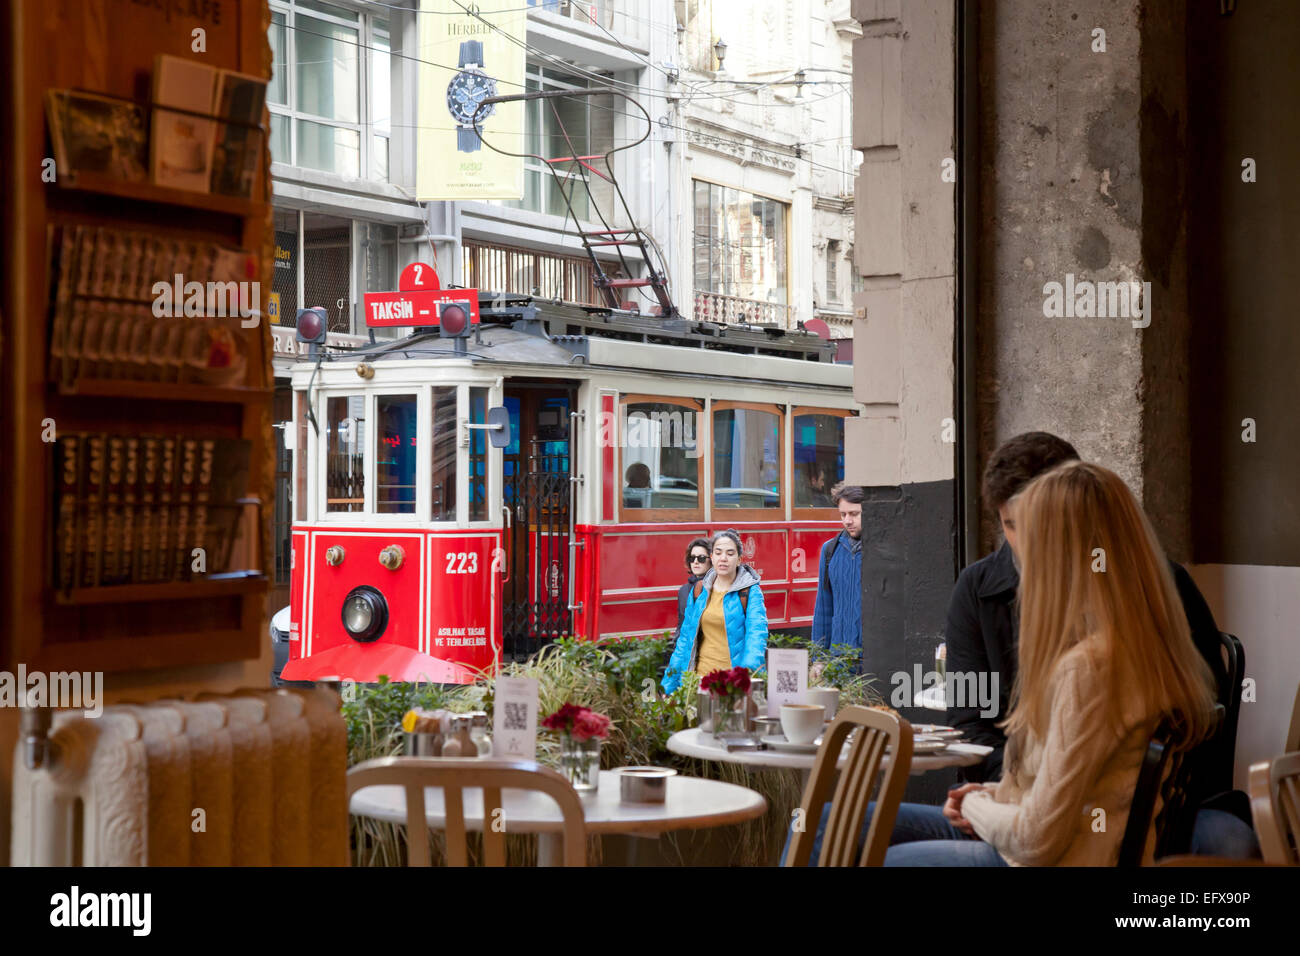 Ancien Tramway, Istiklal Caddesi, Istanbul, couple in coffee shop Banque D'Images